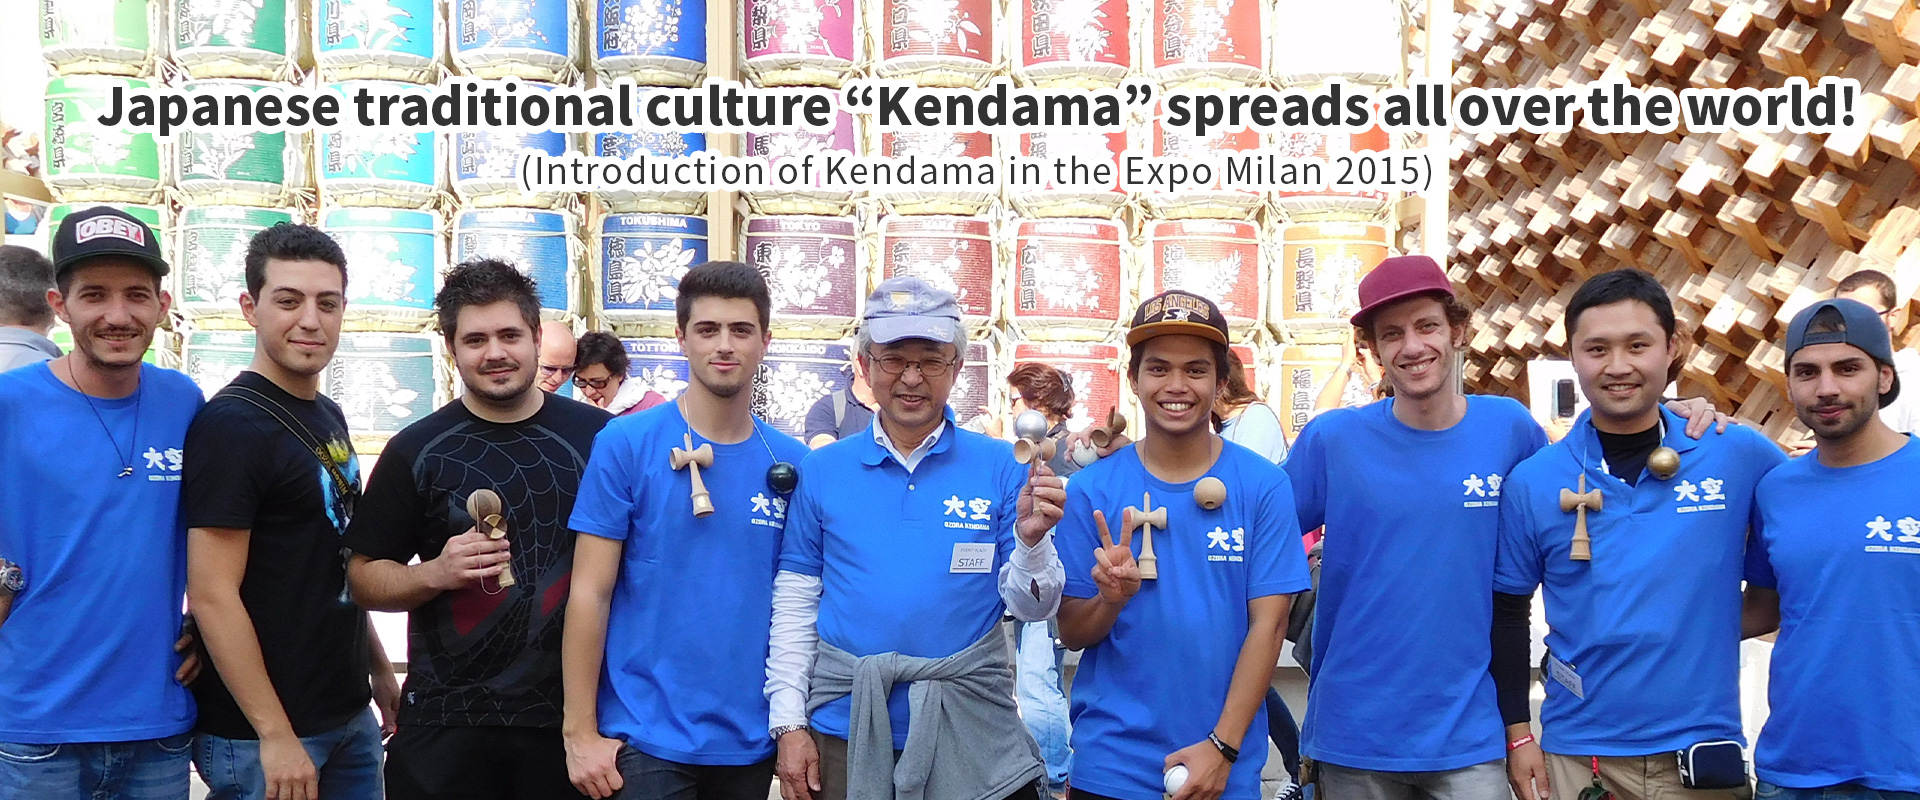 Japanese traditional culture “Kendama” spreads all over the world!
(Introduction of Kendama in the Expo Milan 2015)